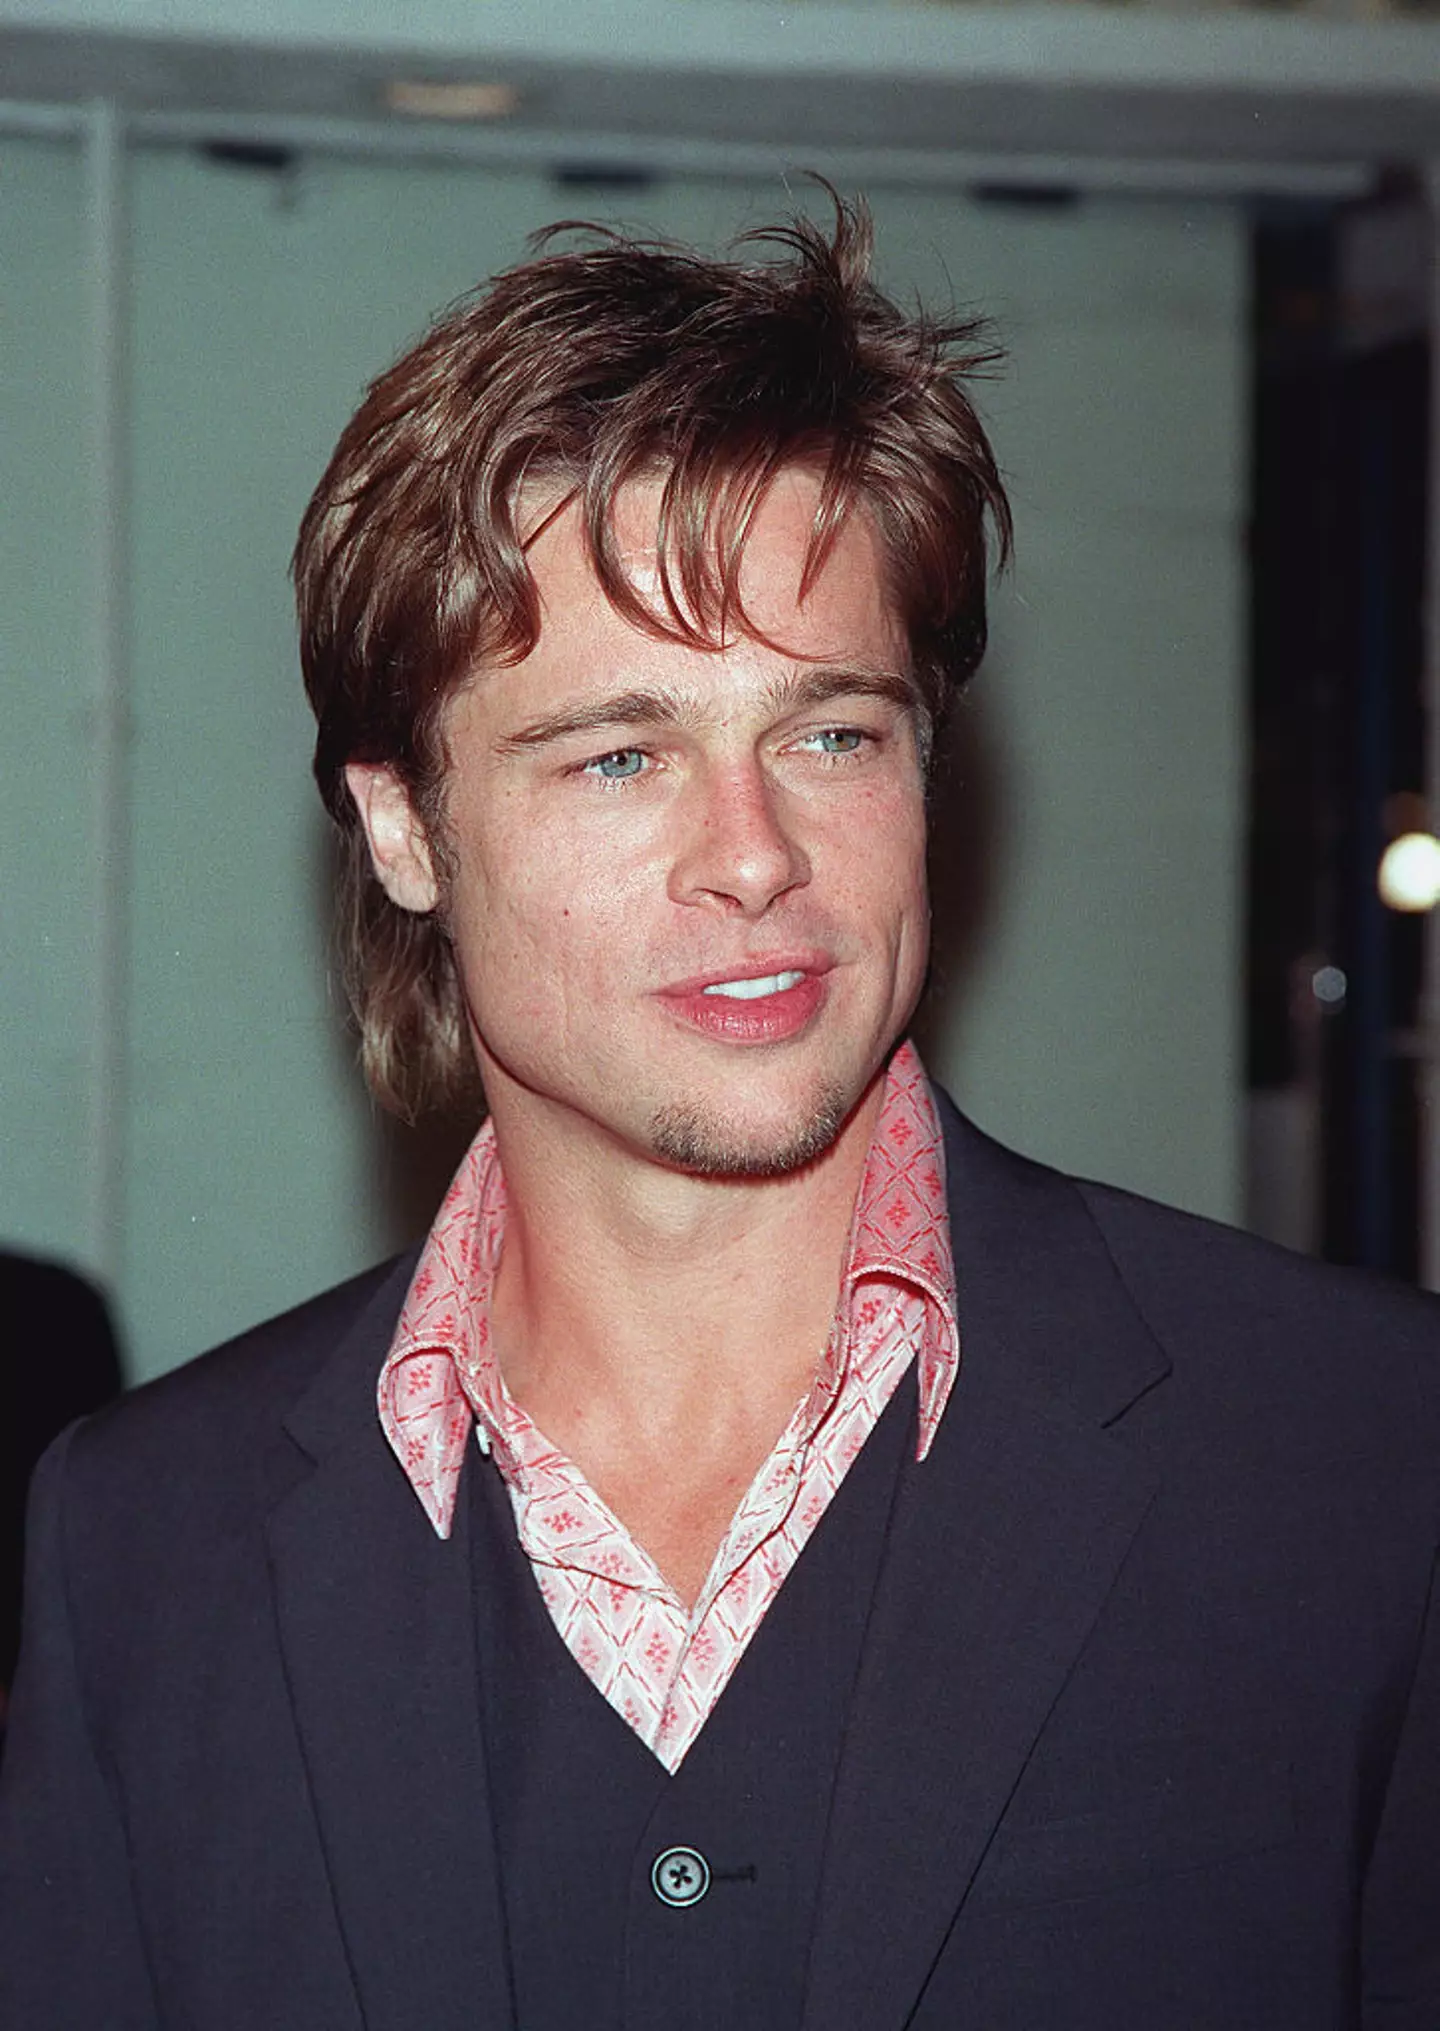 Brad Pitt said Lee told him a year before he died that he thought he would die young.